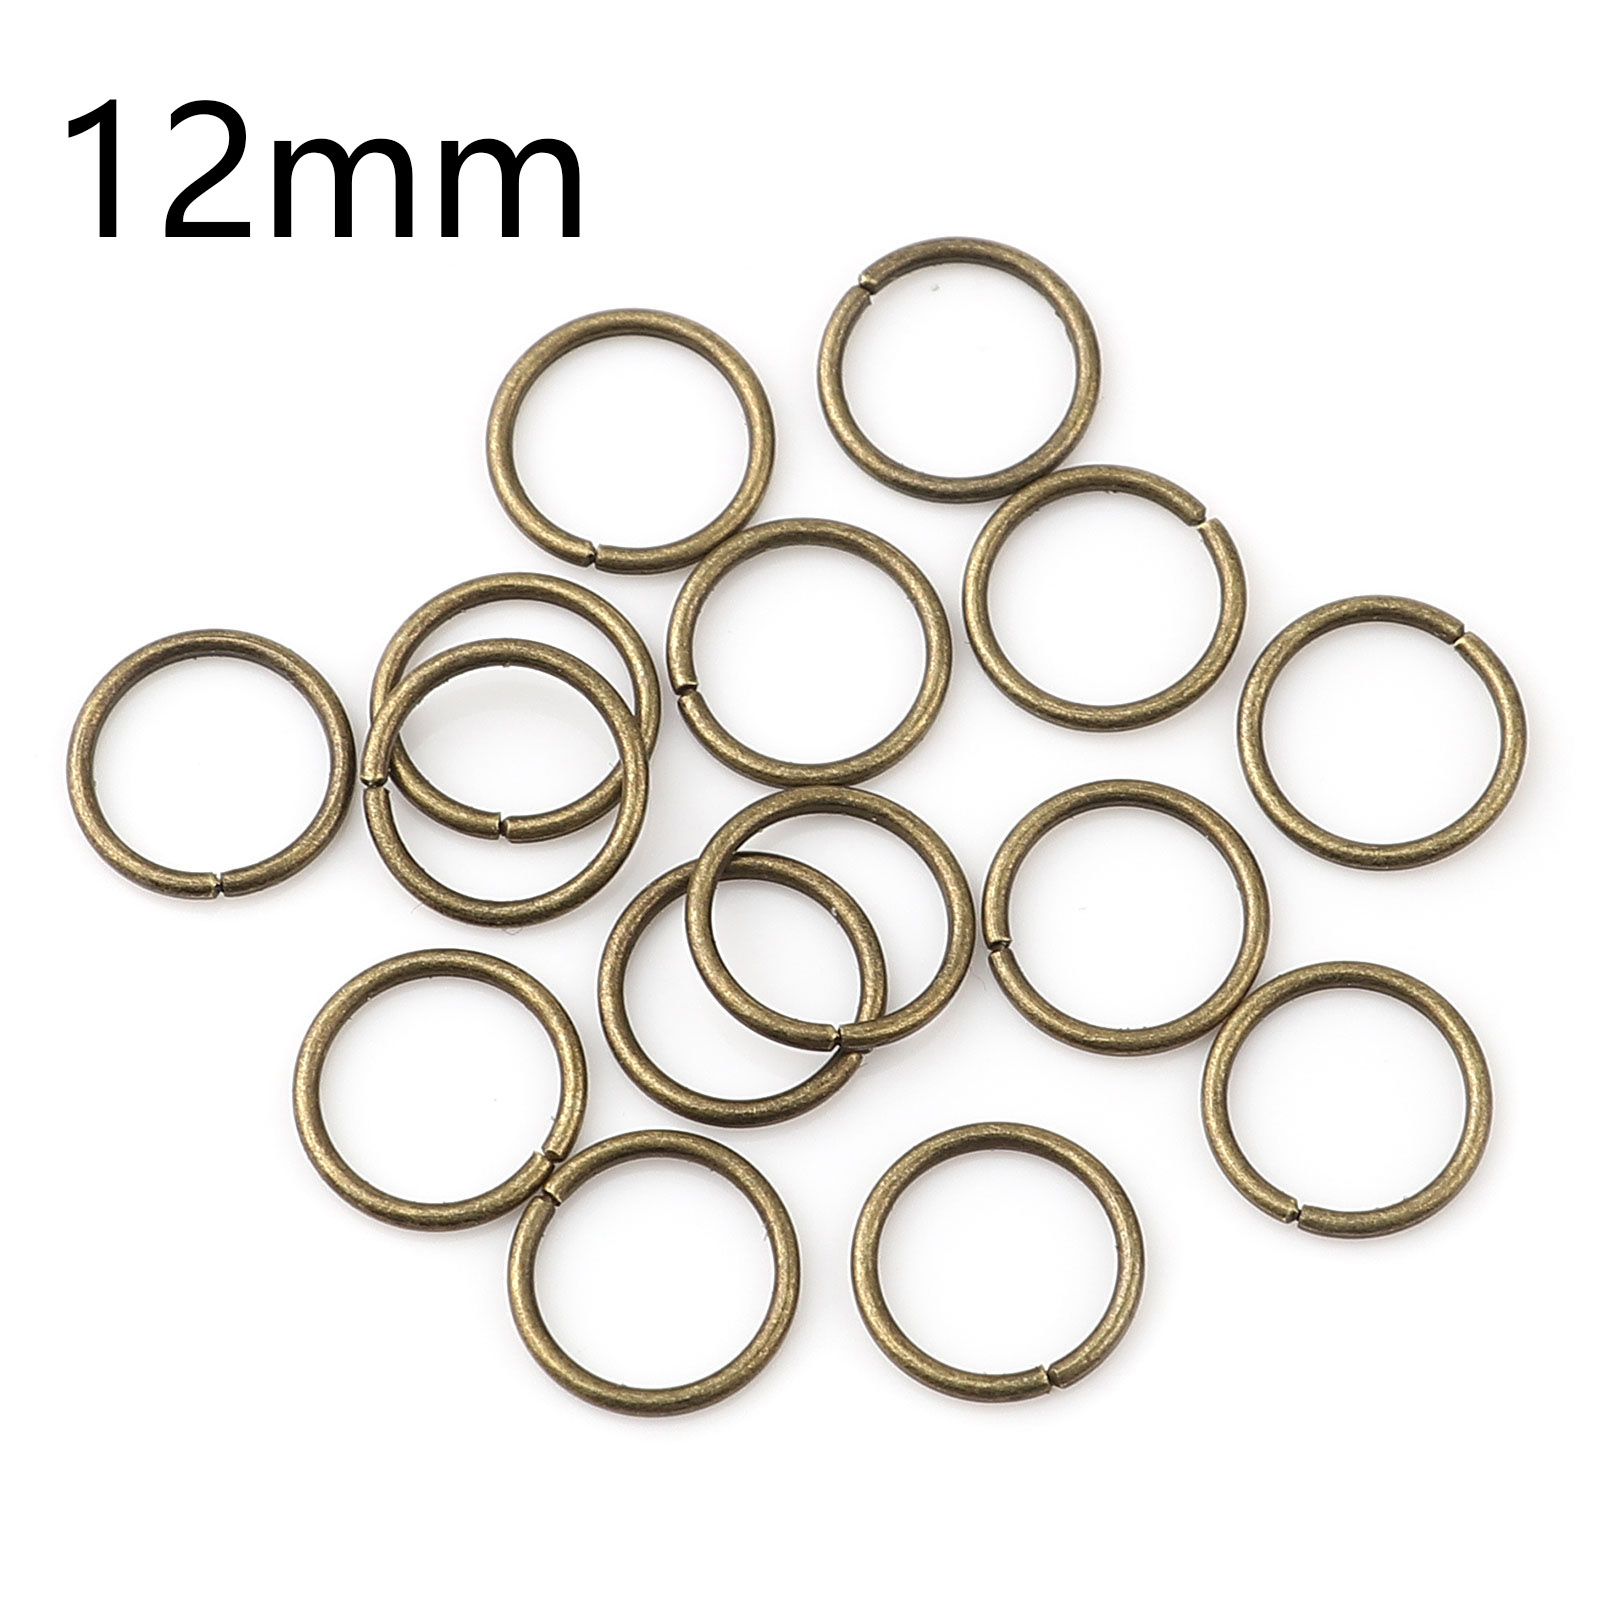 Picture of 1.2mm Iron Based Alloy Open Jump Rings Findings Circle Ring Antique Bronze 12mm Dia, 200 PCs